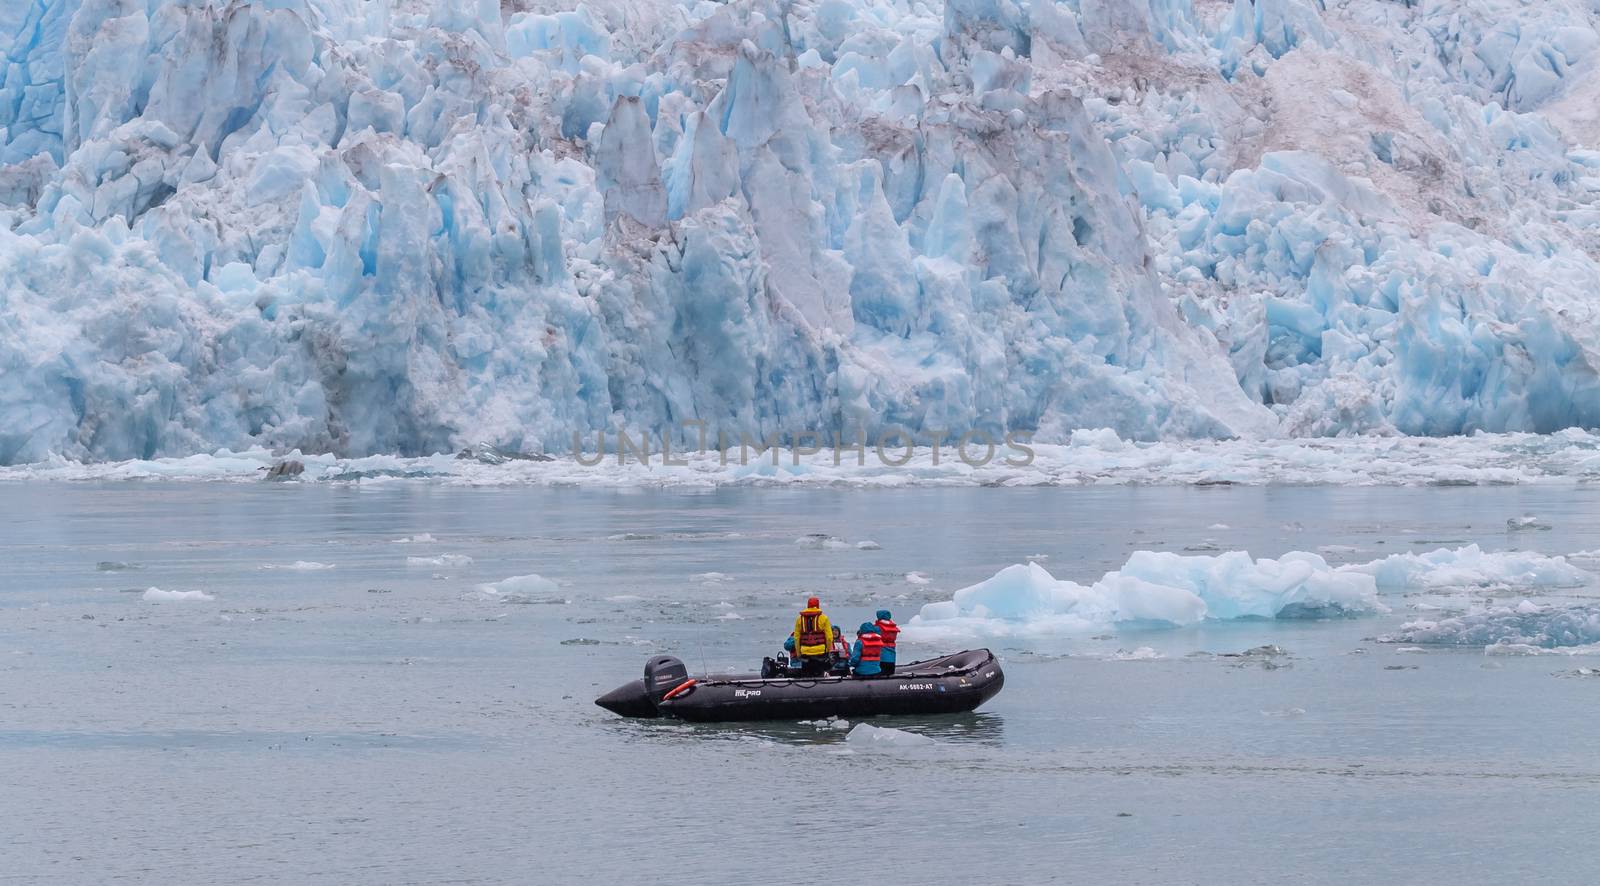 Tracy Arm Fjord, Alaska, US - August 23, 2018: Tourists and a guide in a speedboat drifting among icebergs and a glacier behind it.